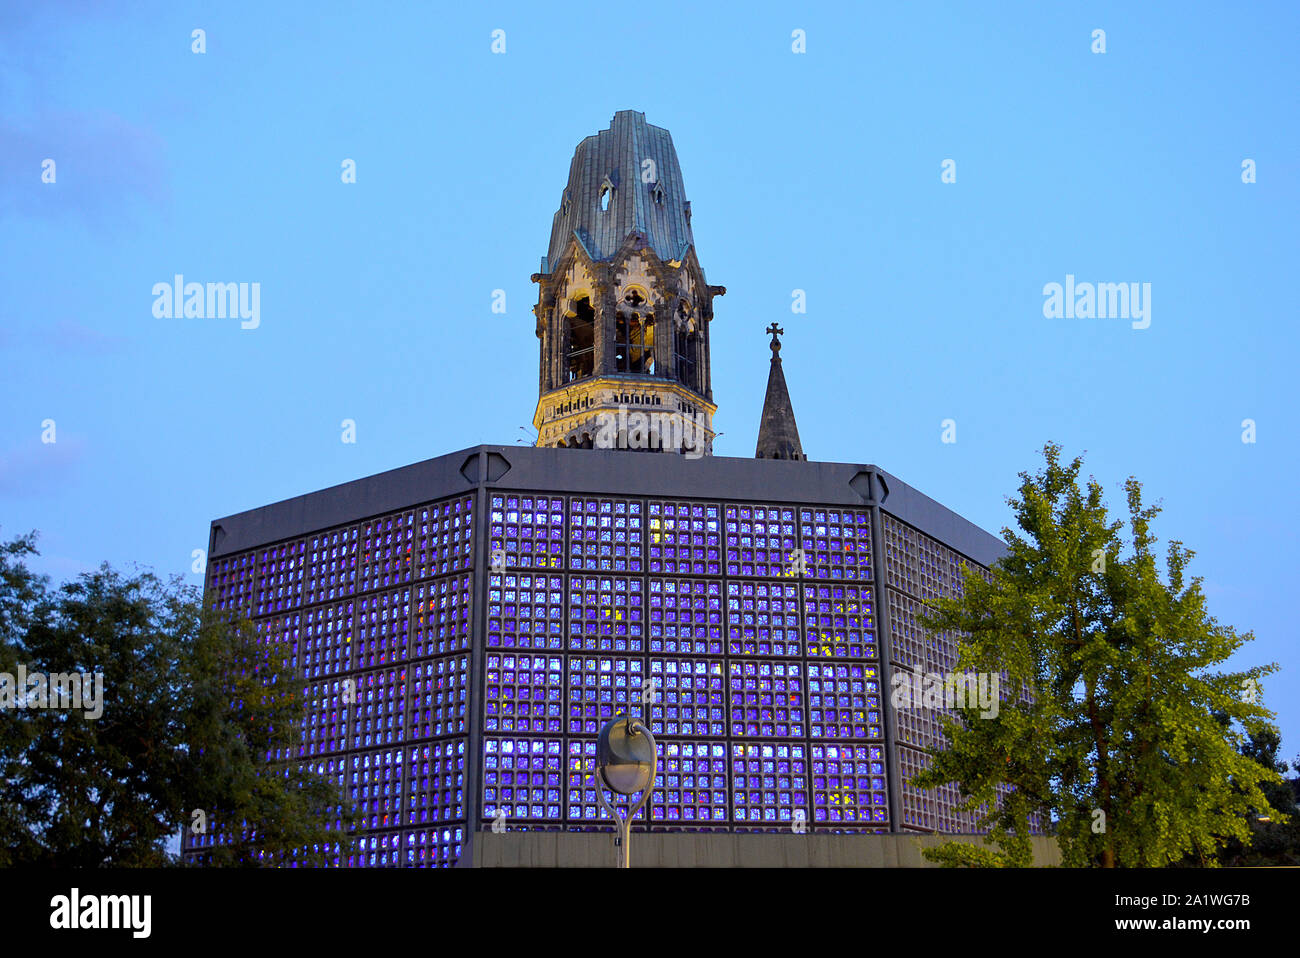 BERLIN, GERMANY - 18 SEPTEMBER 2019: The blue glass windows of the new church lit up in the evening with the damaged tower left as a war memorial Stock Photo